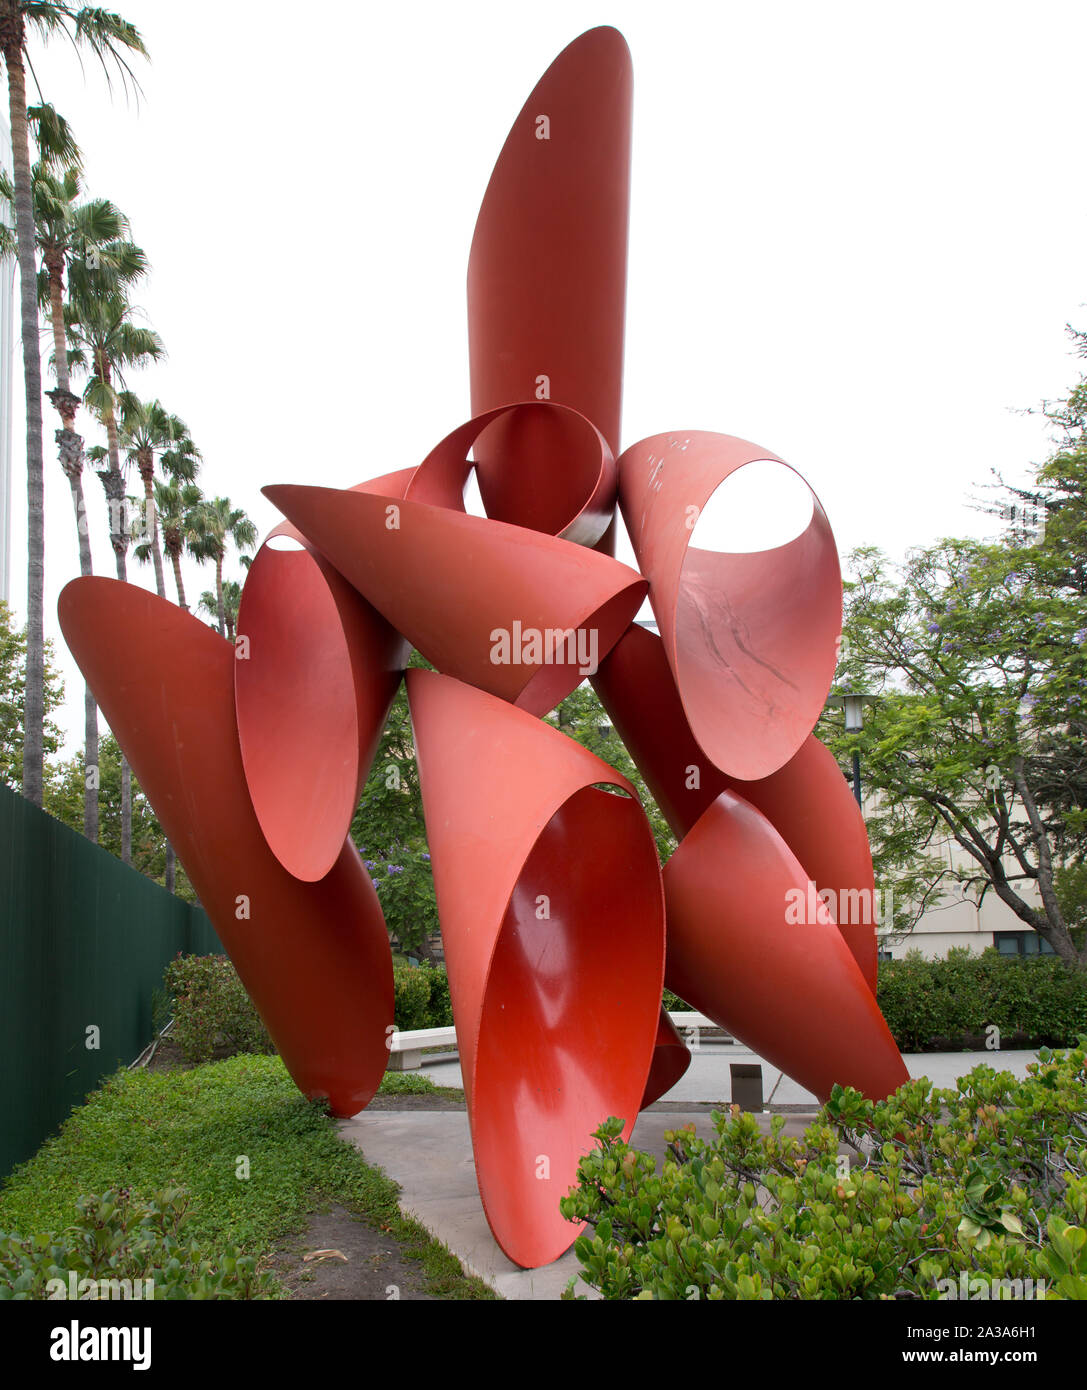 Sculpture at Los Angeles County Museum of Art (LACMA), an art museum in Los Angeles, California Stock Photo